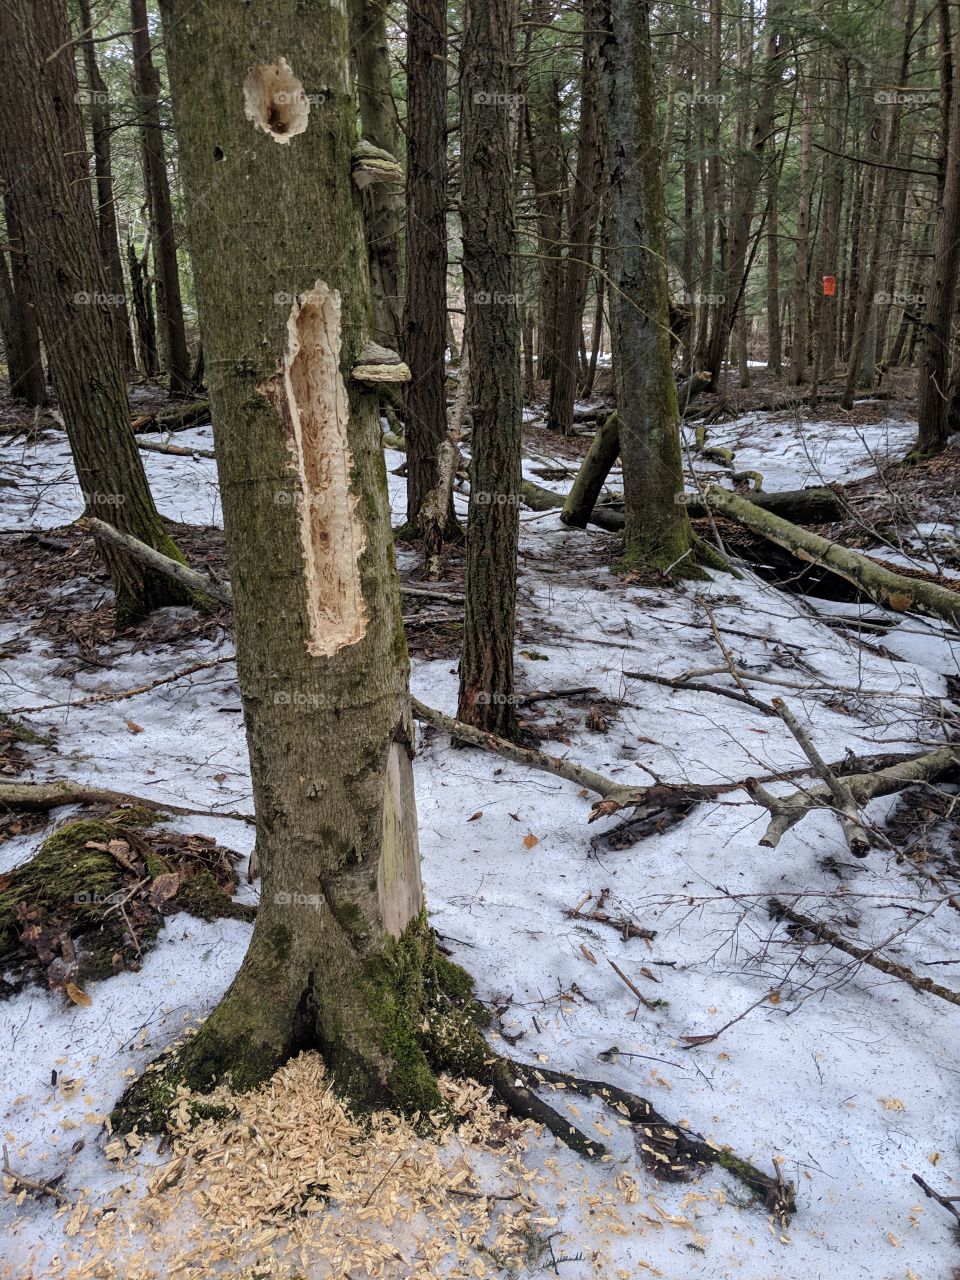 the work of woodpeckers on a tree